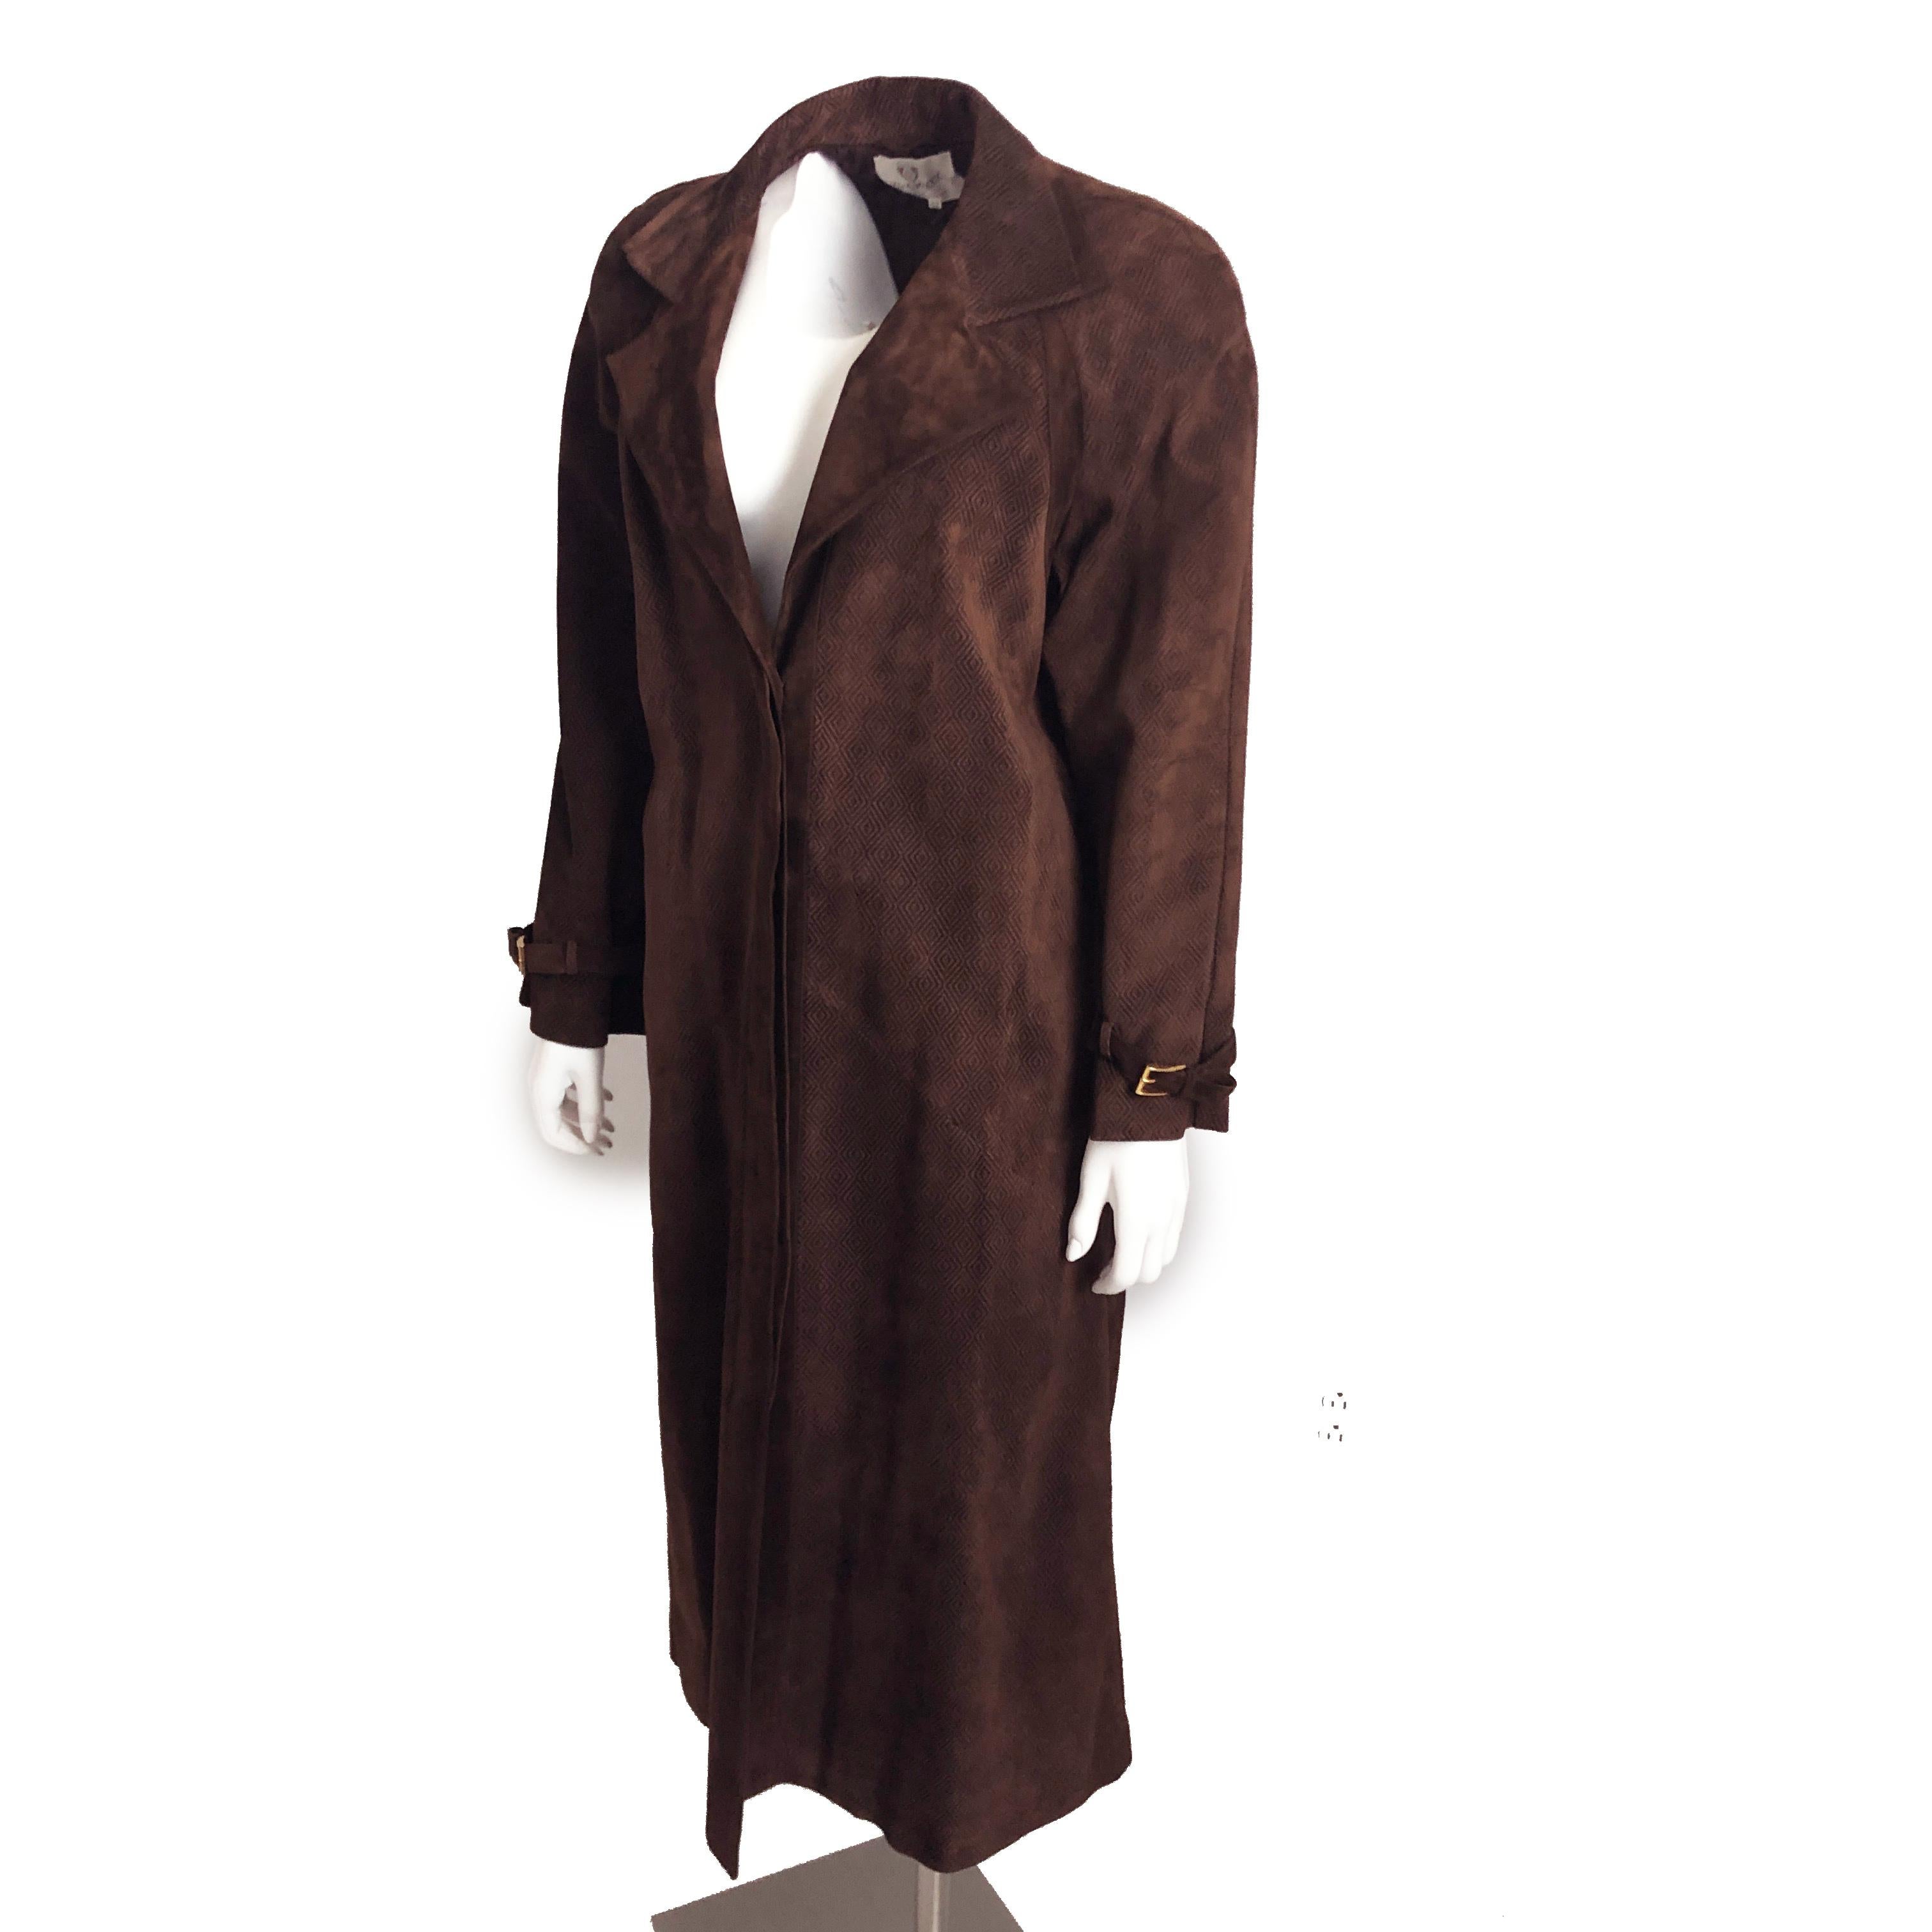 Gucci Long Textured Suede Coat with Matching Skirt 2pc Set Vintage Sz 42/46  In Good Condition For Sale In Port Saint Lucie, FL